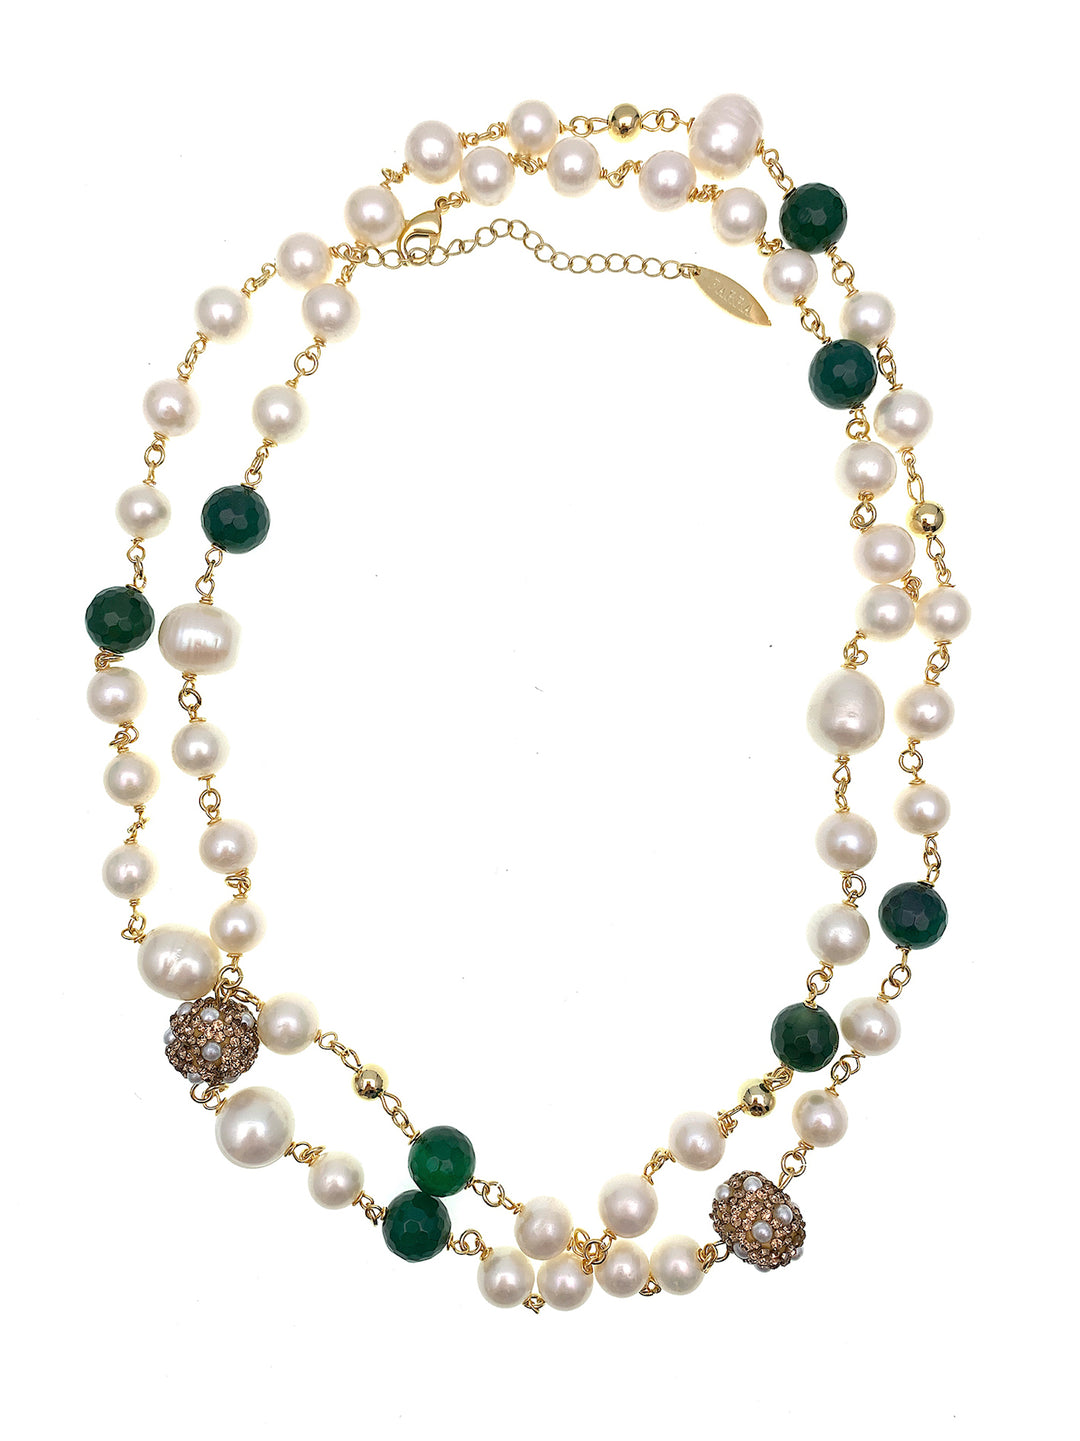 Green Agate With Freshwater Pearls Two-Ways Necklace FN004 - FARRA